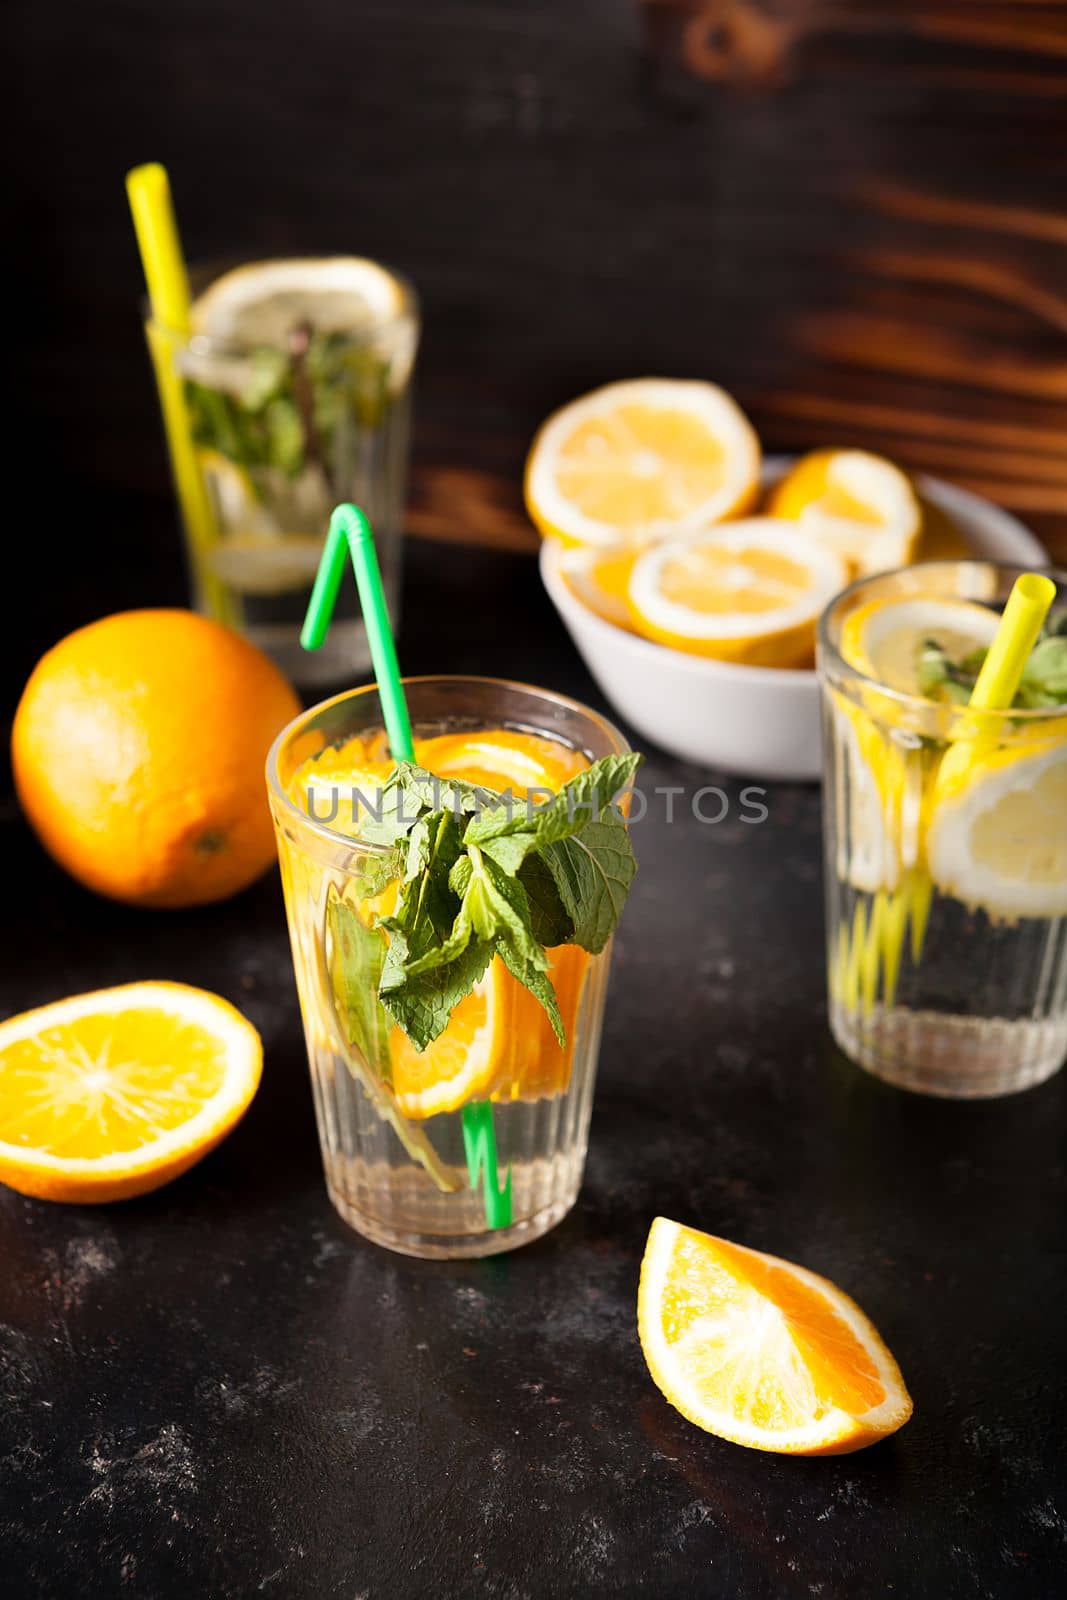 Healthy and delicous detox water made of lemons and oranges by DCStudio